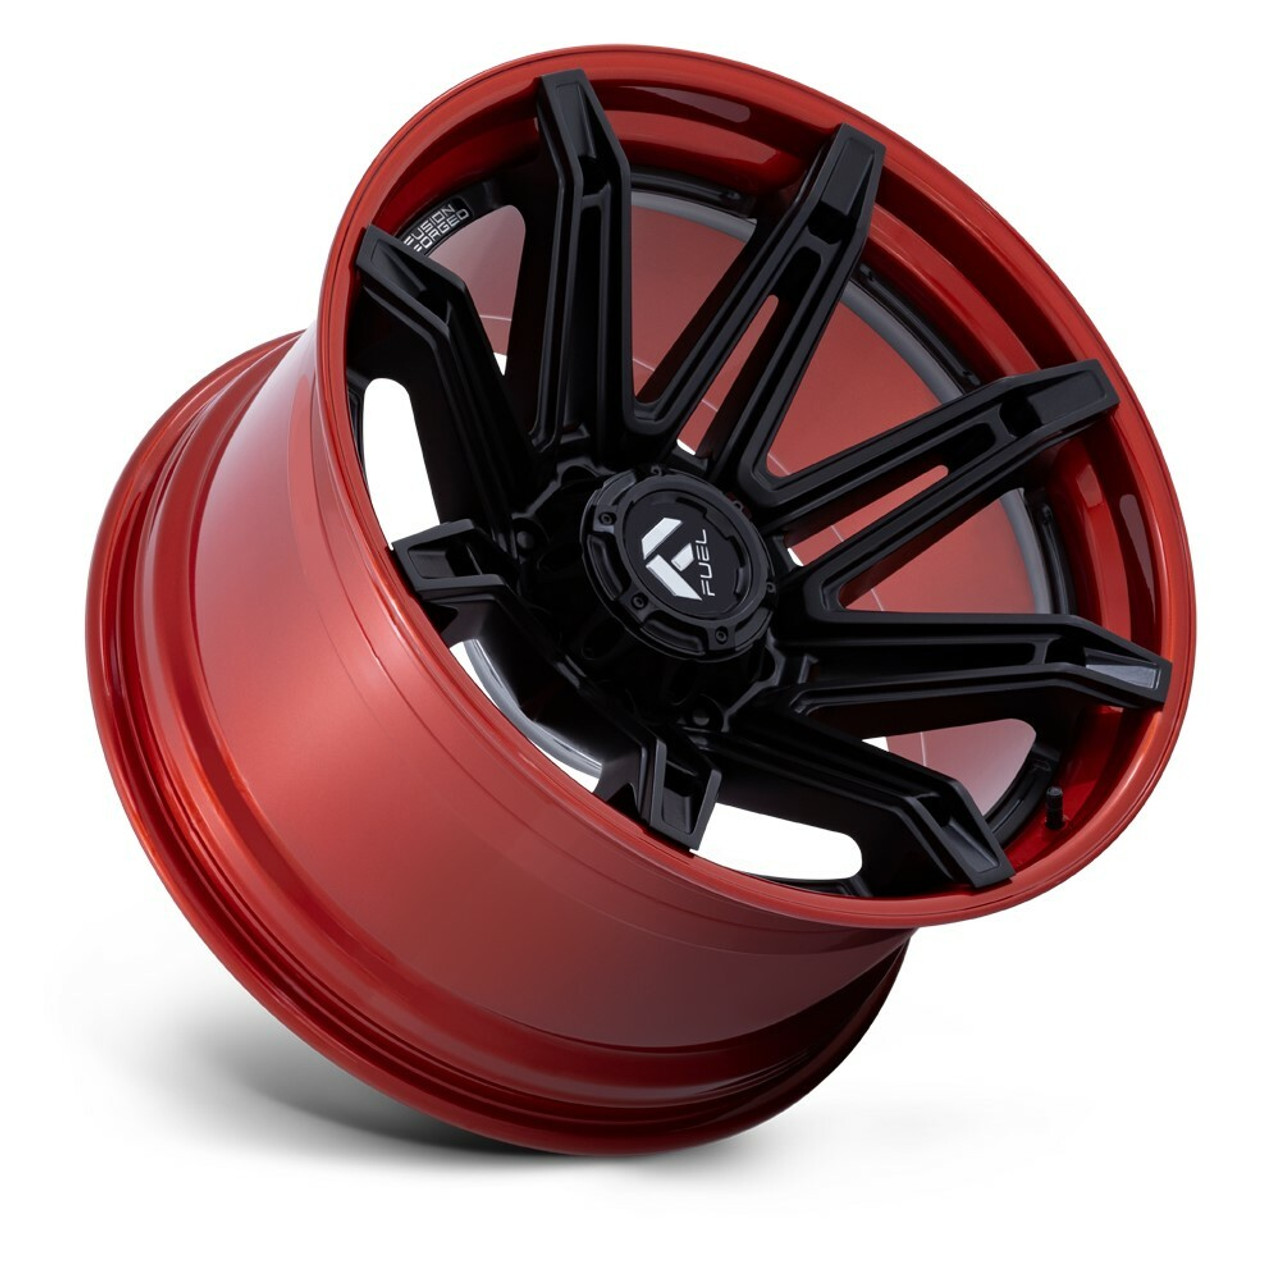 Fuel FC401 Brawl 22x12 8x180 Matte Black Candy Red Lip 22" -44mm For Chevy GMC